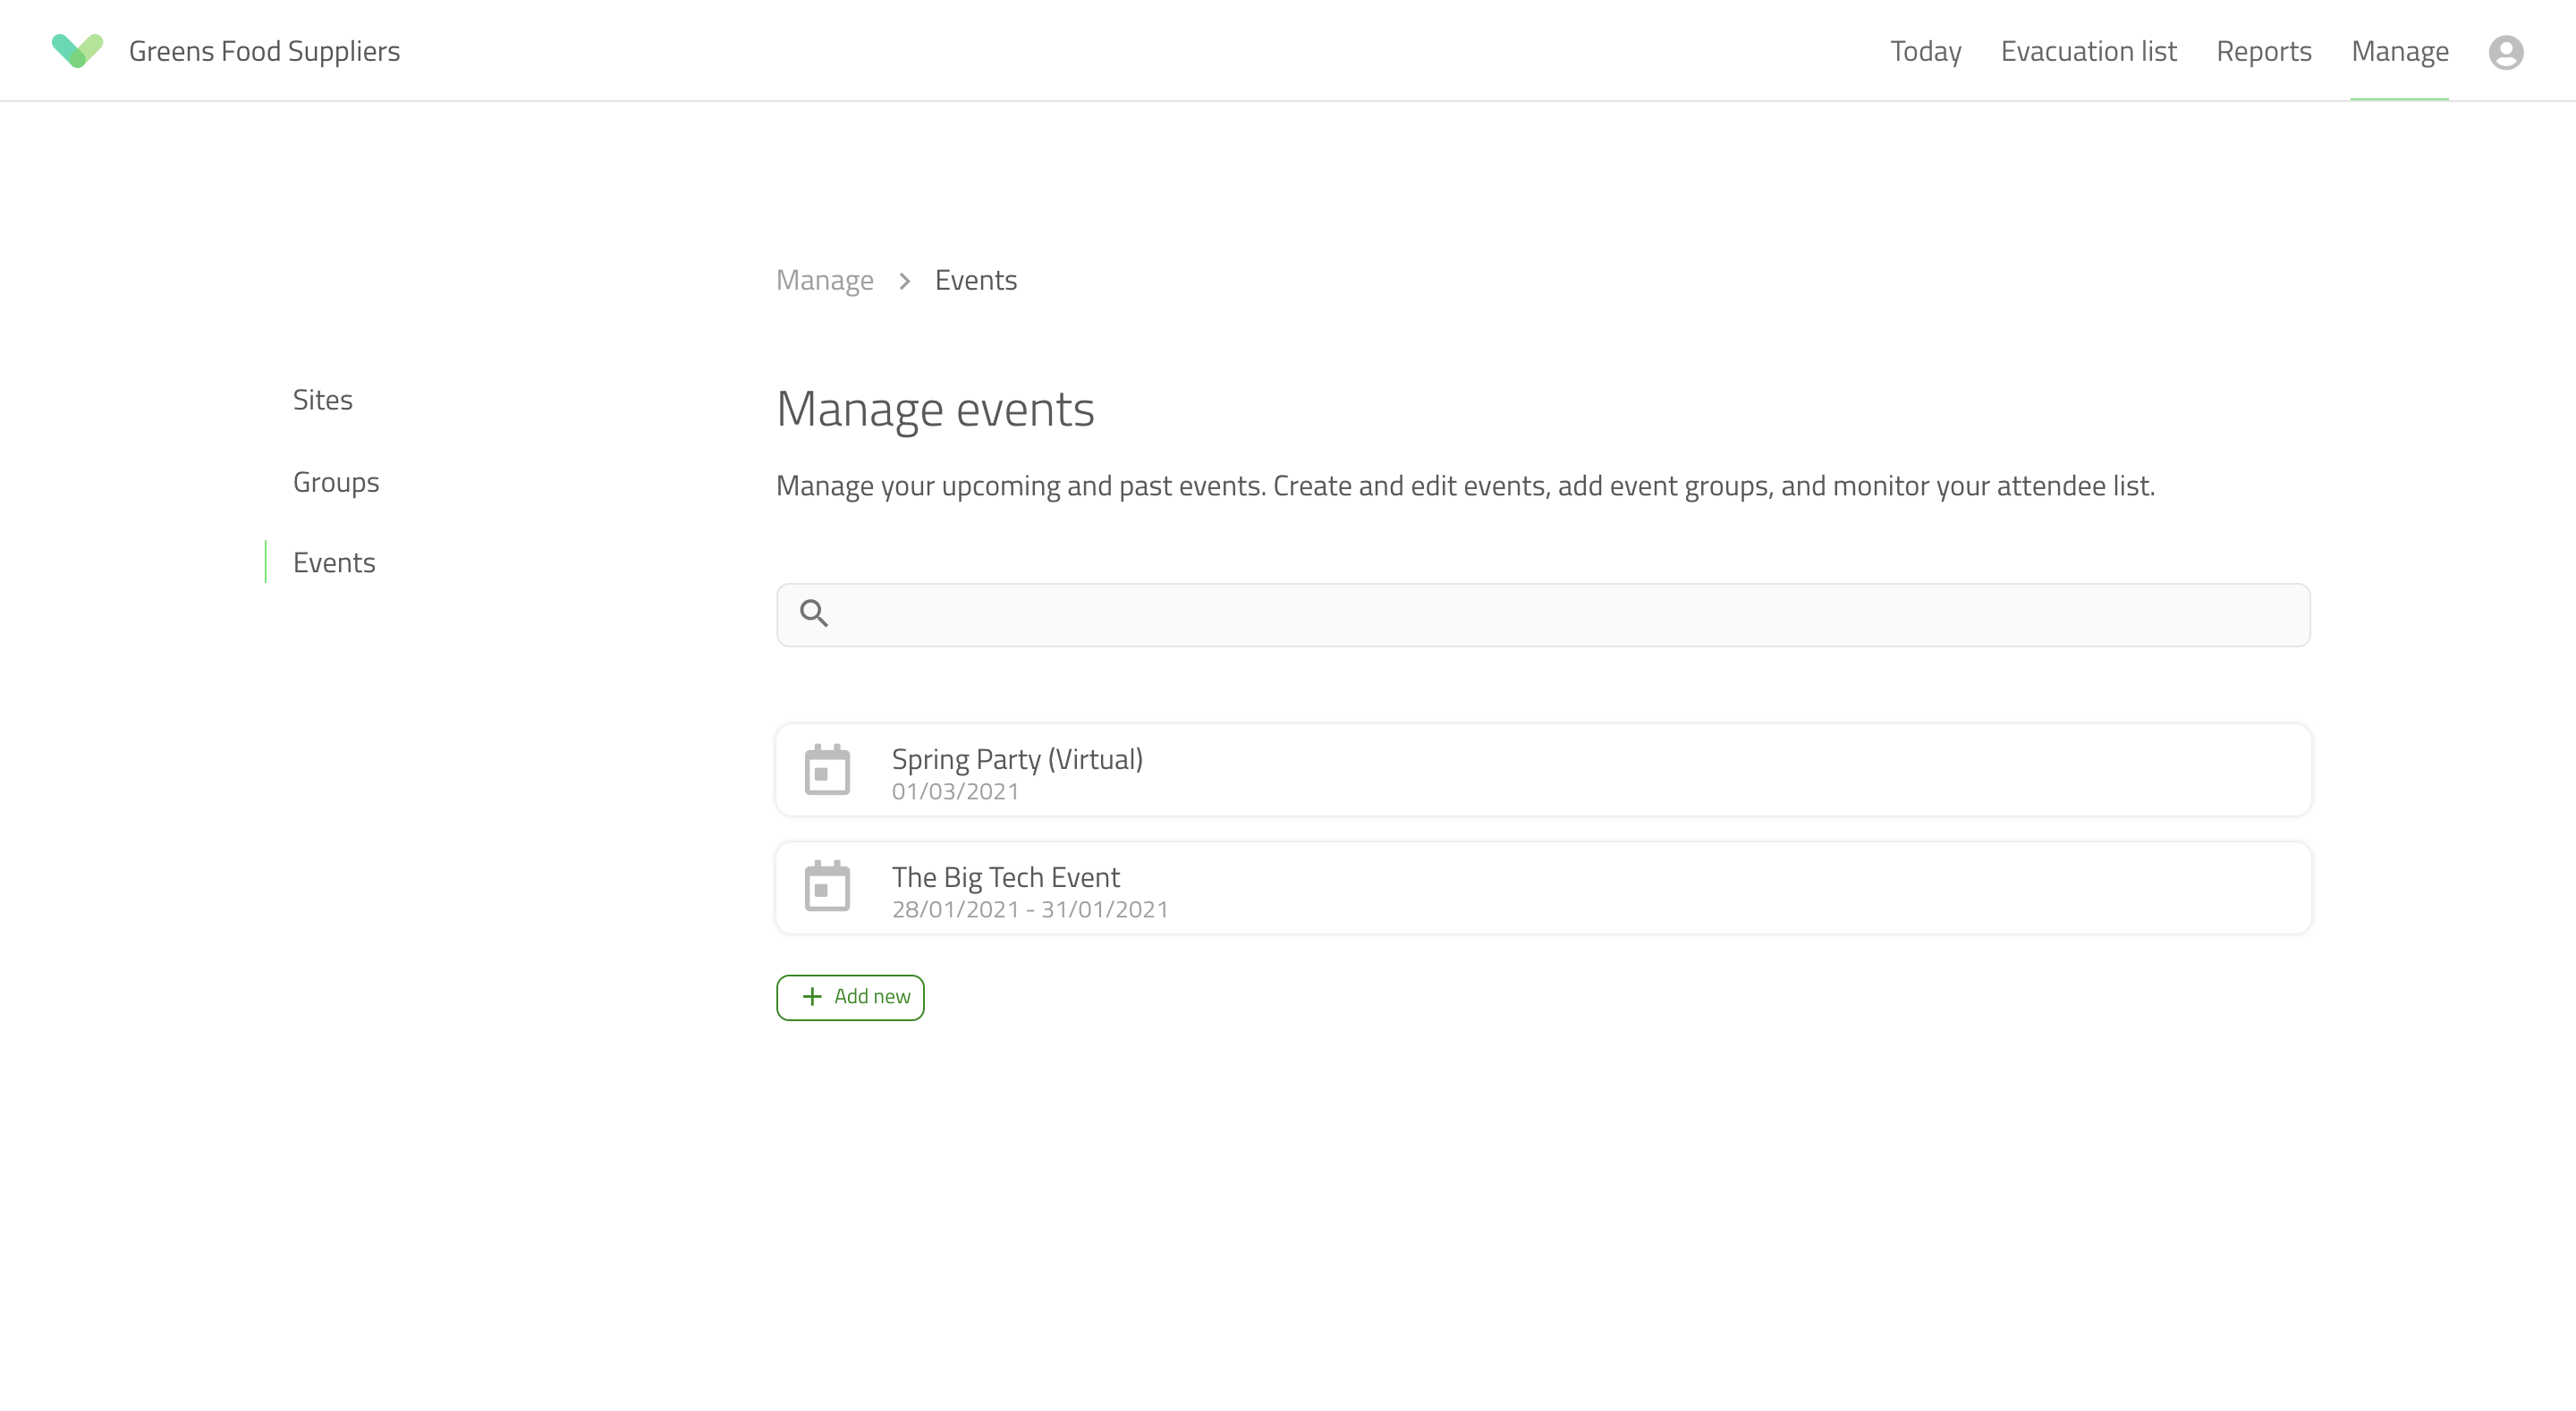 The event section of the management portal